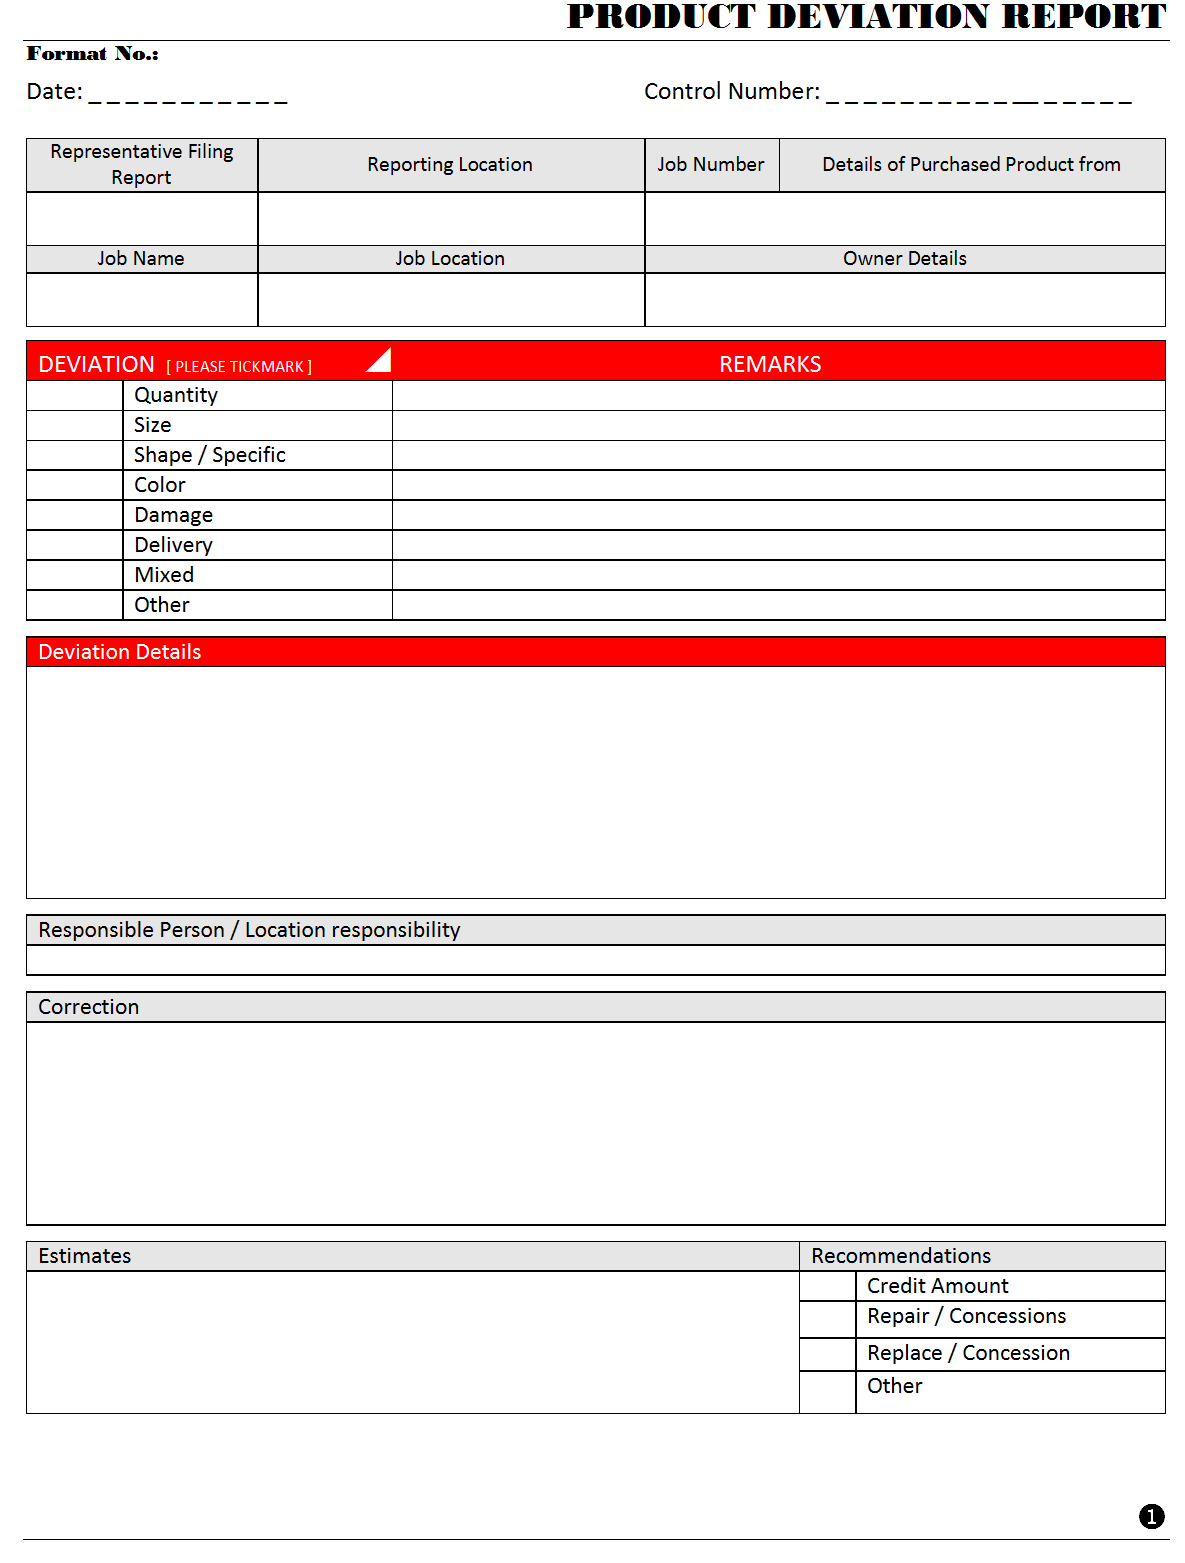 Product Deviation Report - Within Deviation Report Template